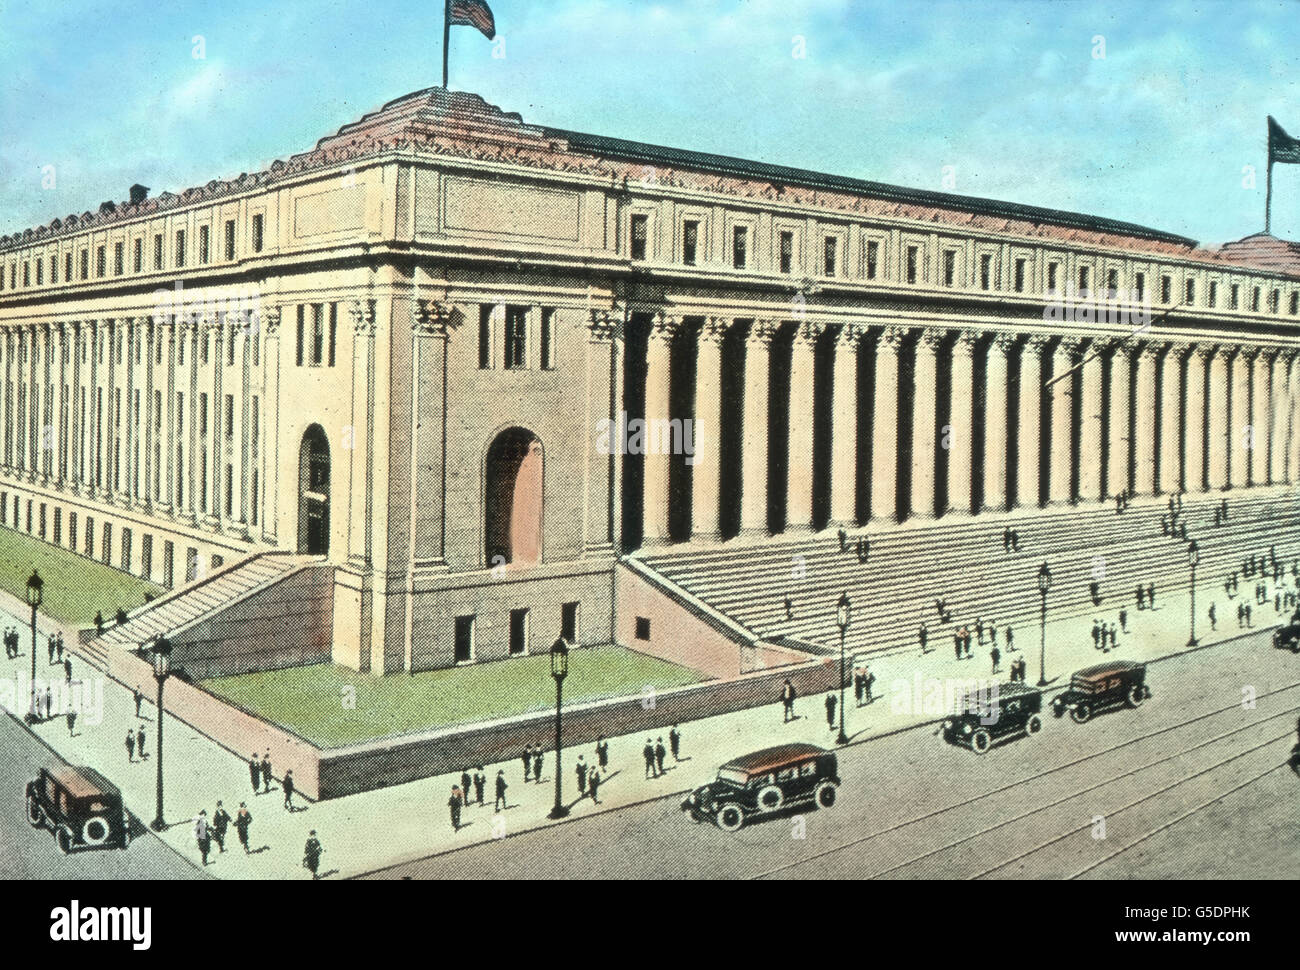 Die Hauptpost in New York.  America, North, USA, United States of, Main Post office, travel, 1910s, 1920s, 20th century, archive, Carl Simon, history, historical, mail, post, office, department, architecture, building, illustration, hand coloured glass slide Stock Photo